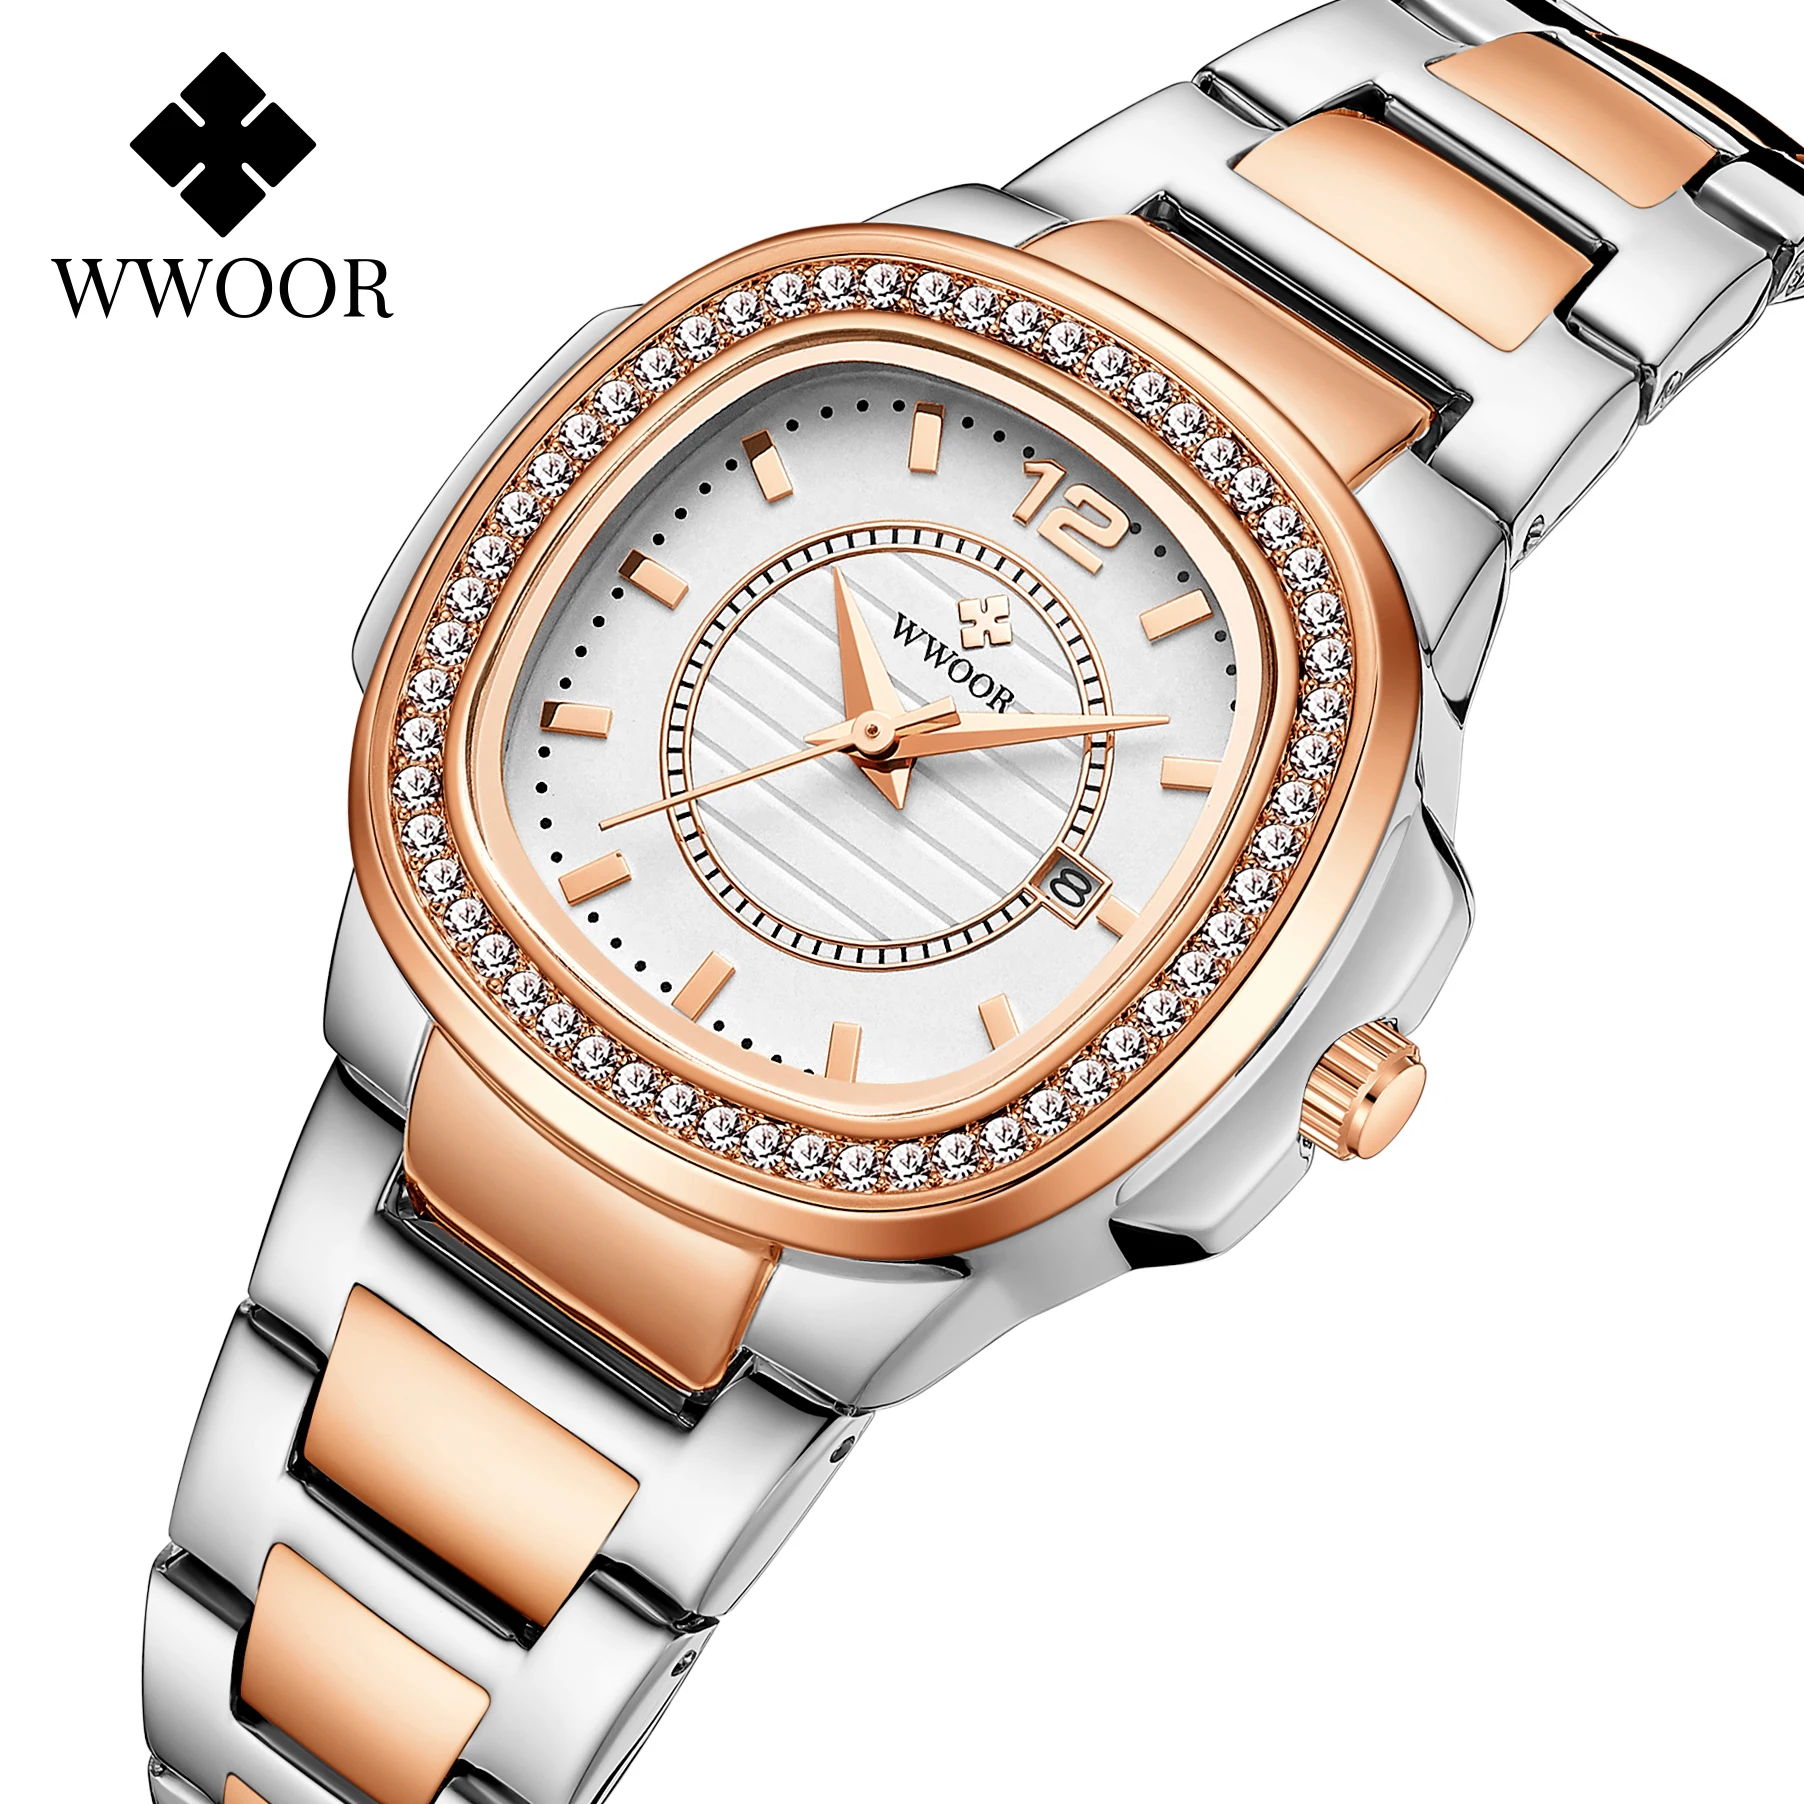 Wristwatches WWOOR Square Watch Men With Automatic Week Date Luxury  Stainless Steel Gold Mens Quartz Wrist Watches Relogio Masculino 230509  From Shanye08, $12.05 | DHgate.Com